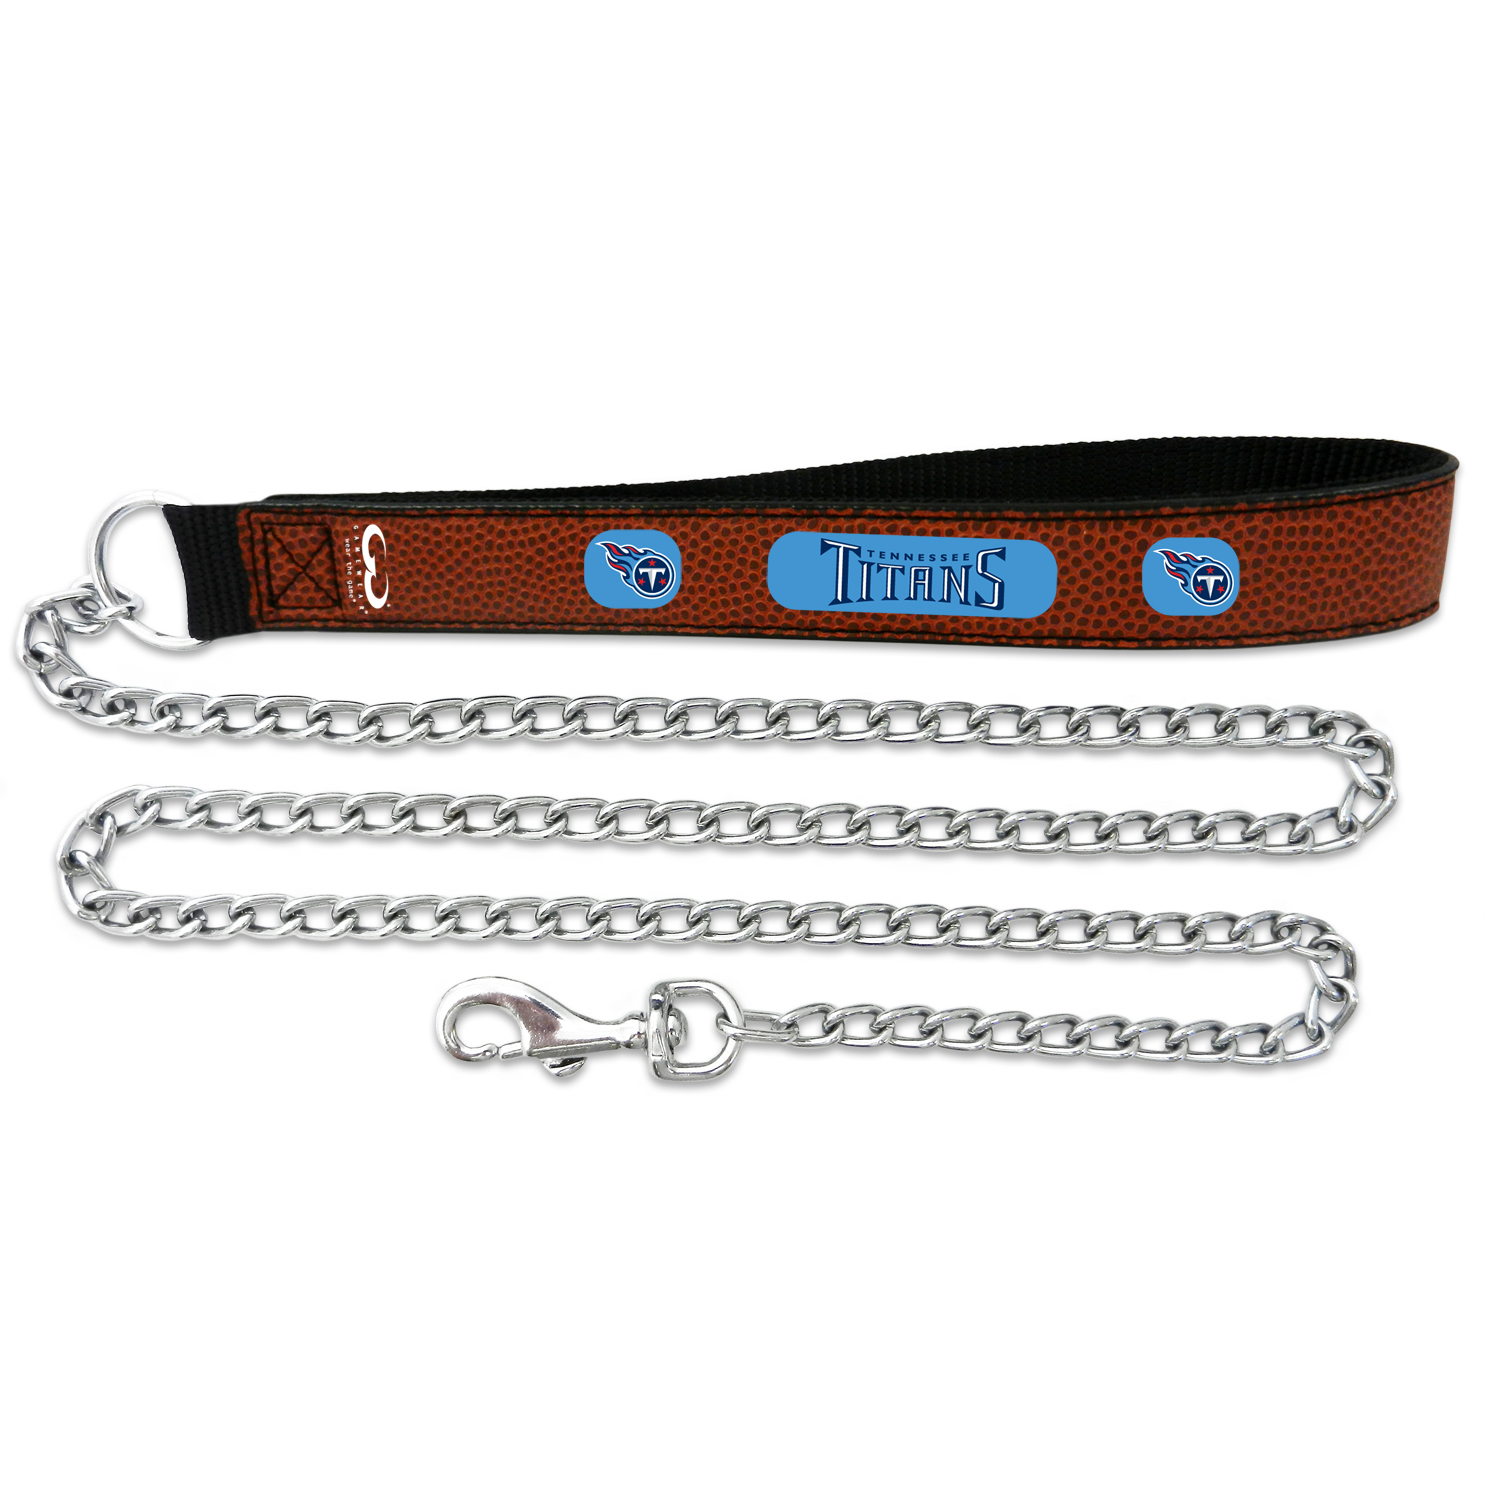 GAMEWEAR Tennessee Titans Football Leather Chain Leash